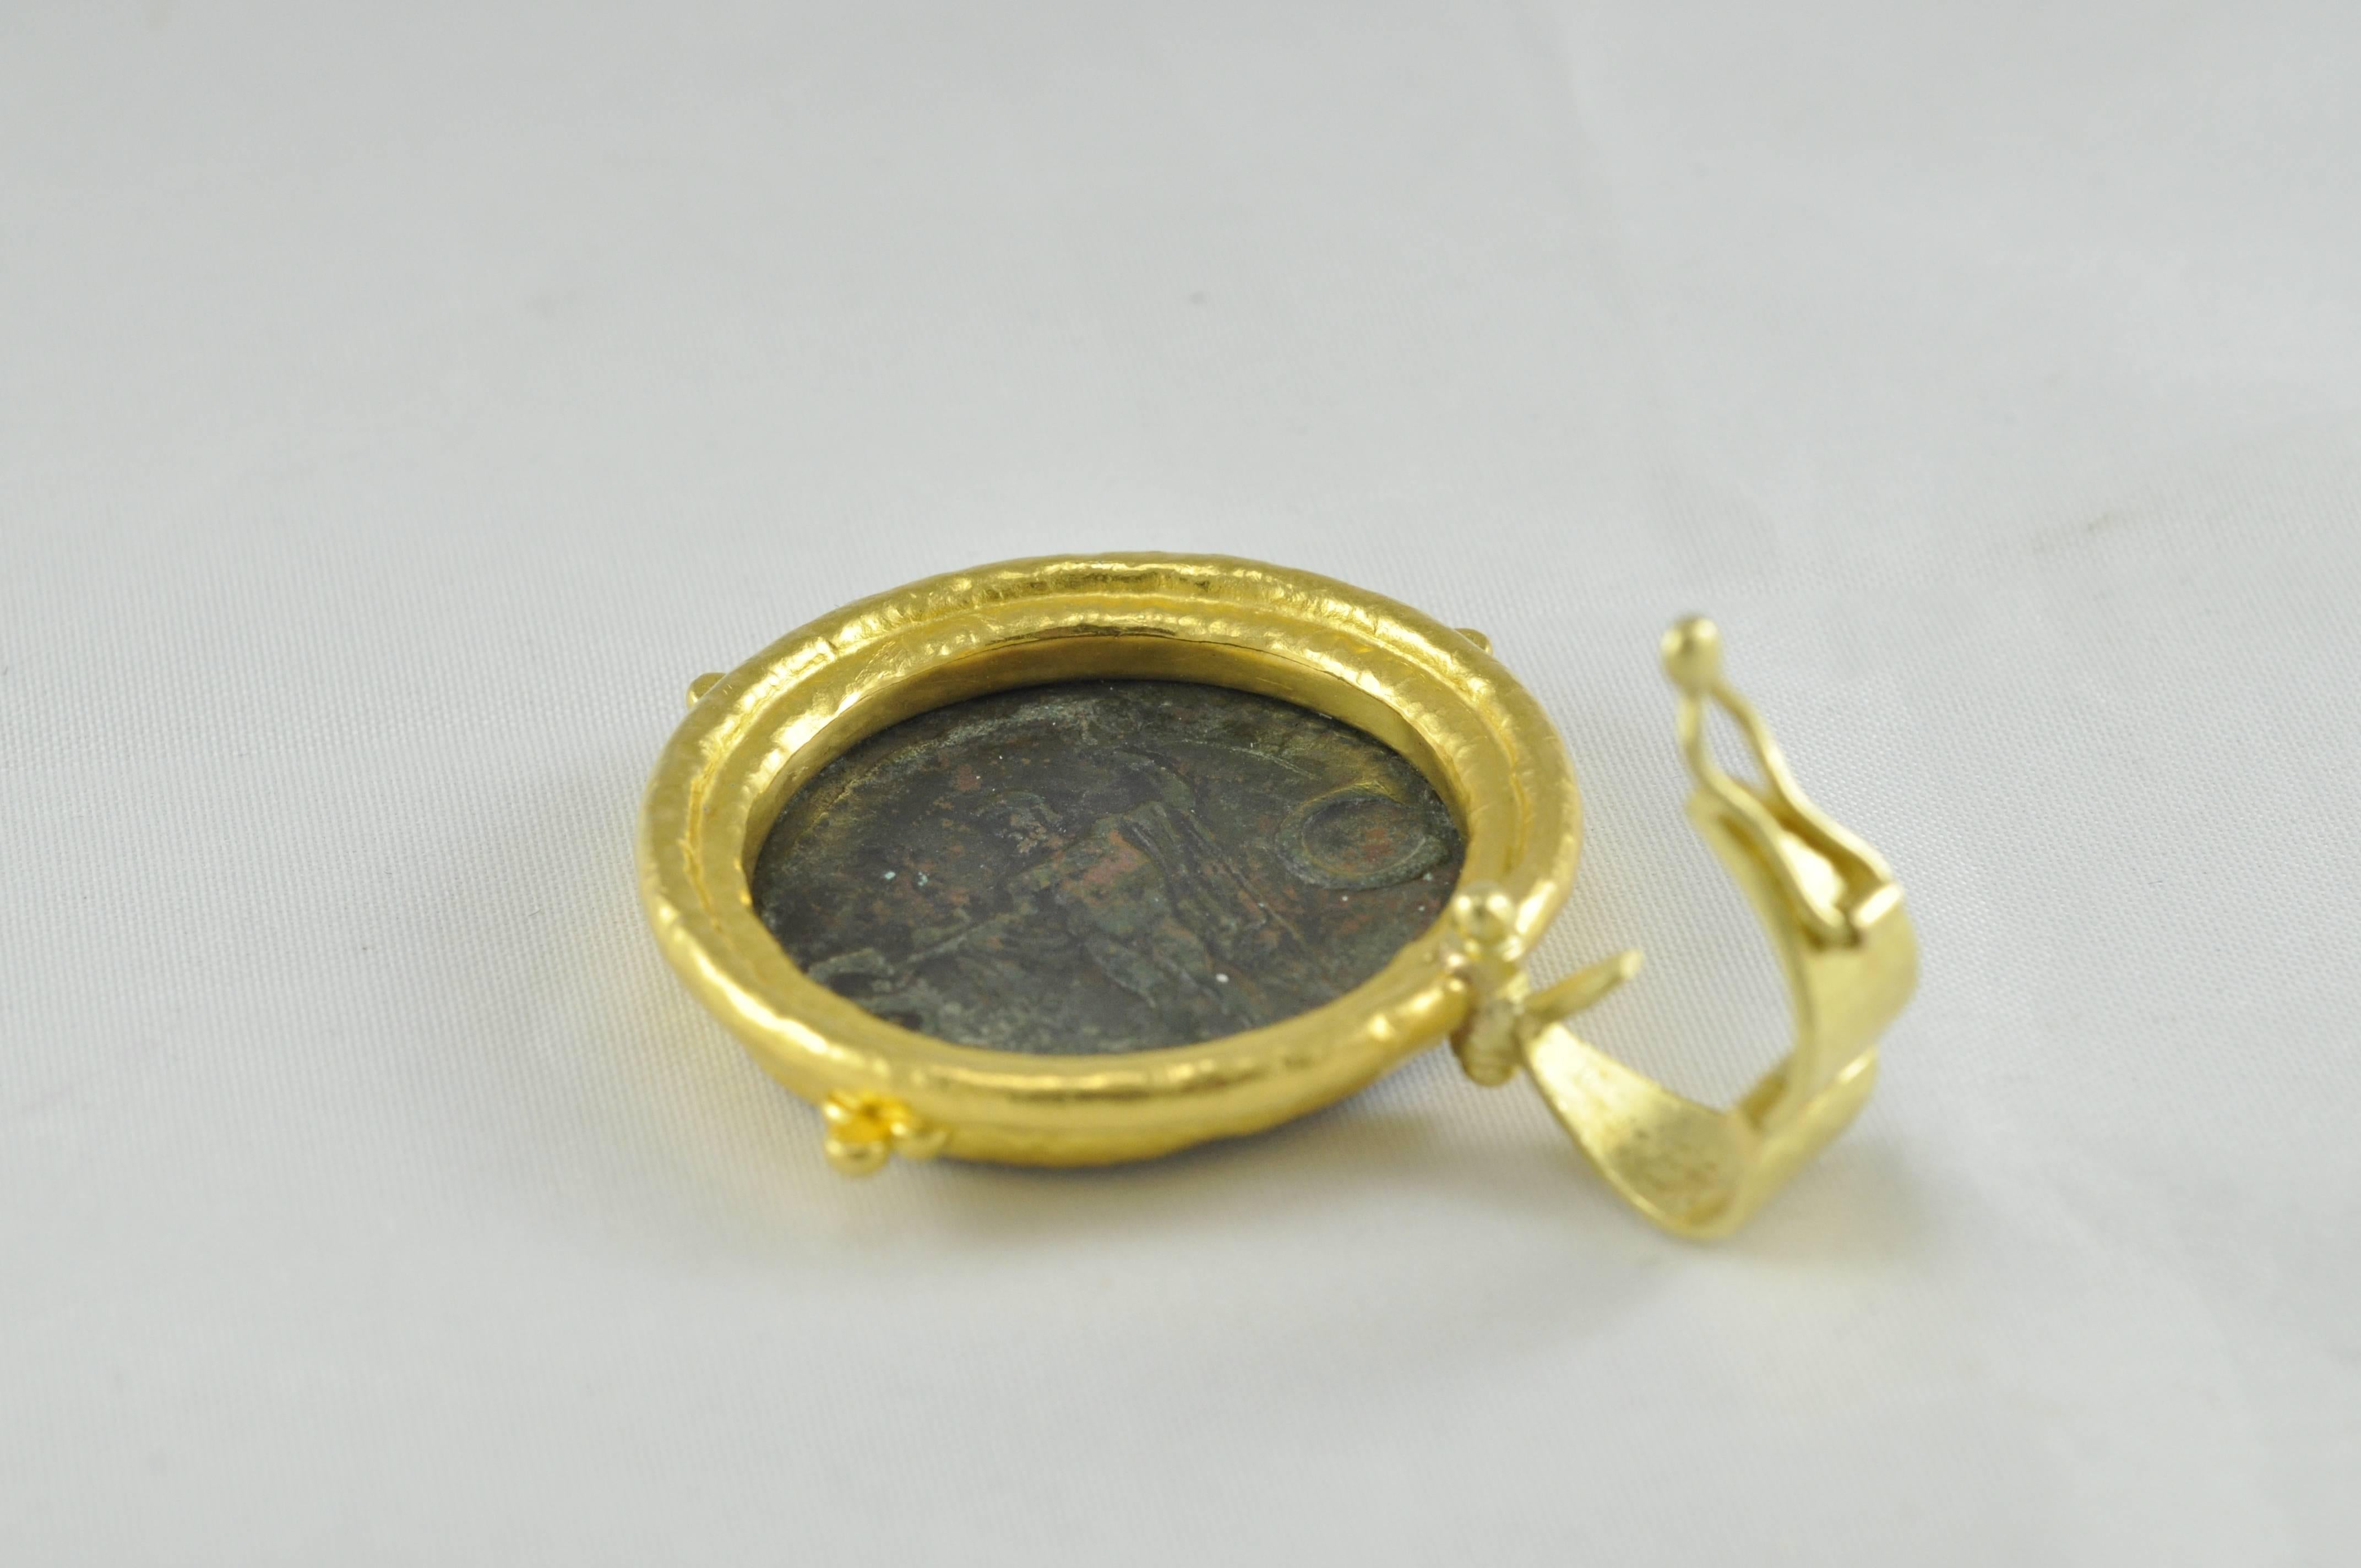 Imagine. The first person to have touch this coin lived 2000 years ago! Wearing this pendant is wear history. The Roman Coin from the time of the Julius Caesar, dating between 37-41 AD, is set into a worthy 24K Yellow Gold Pendant.   

Coin is Head